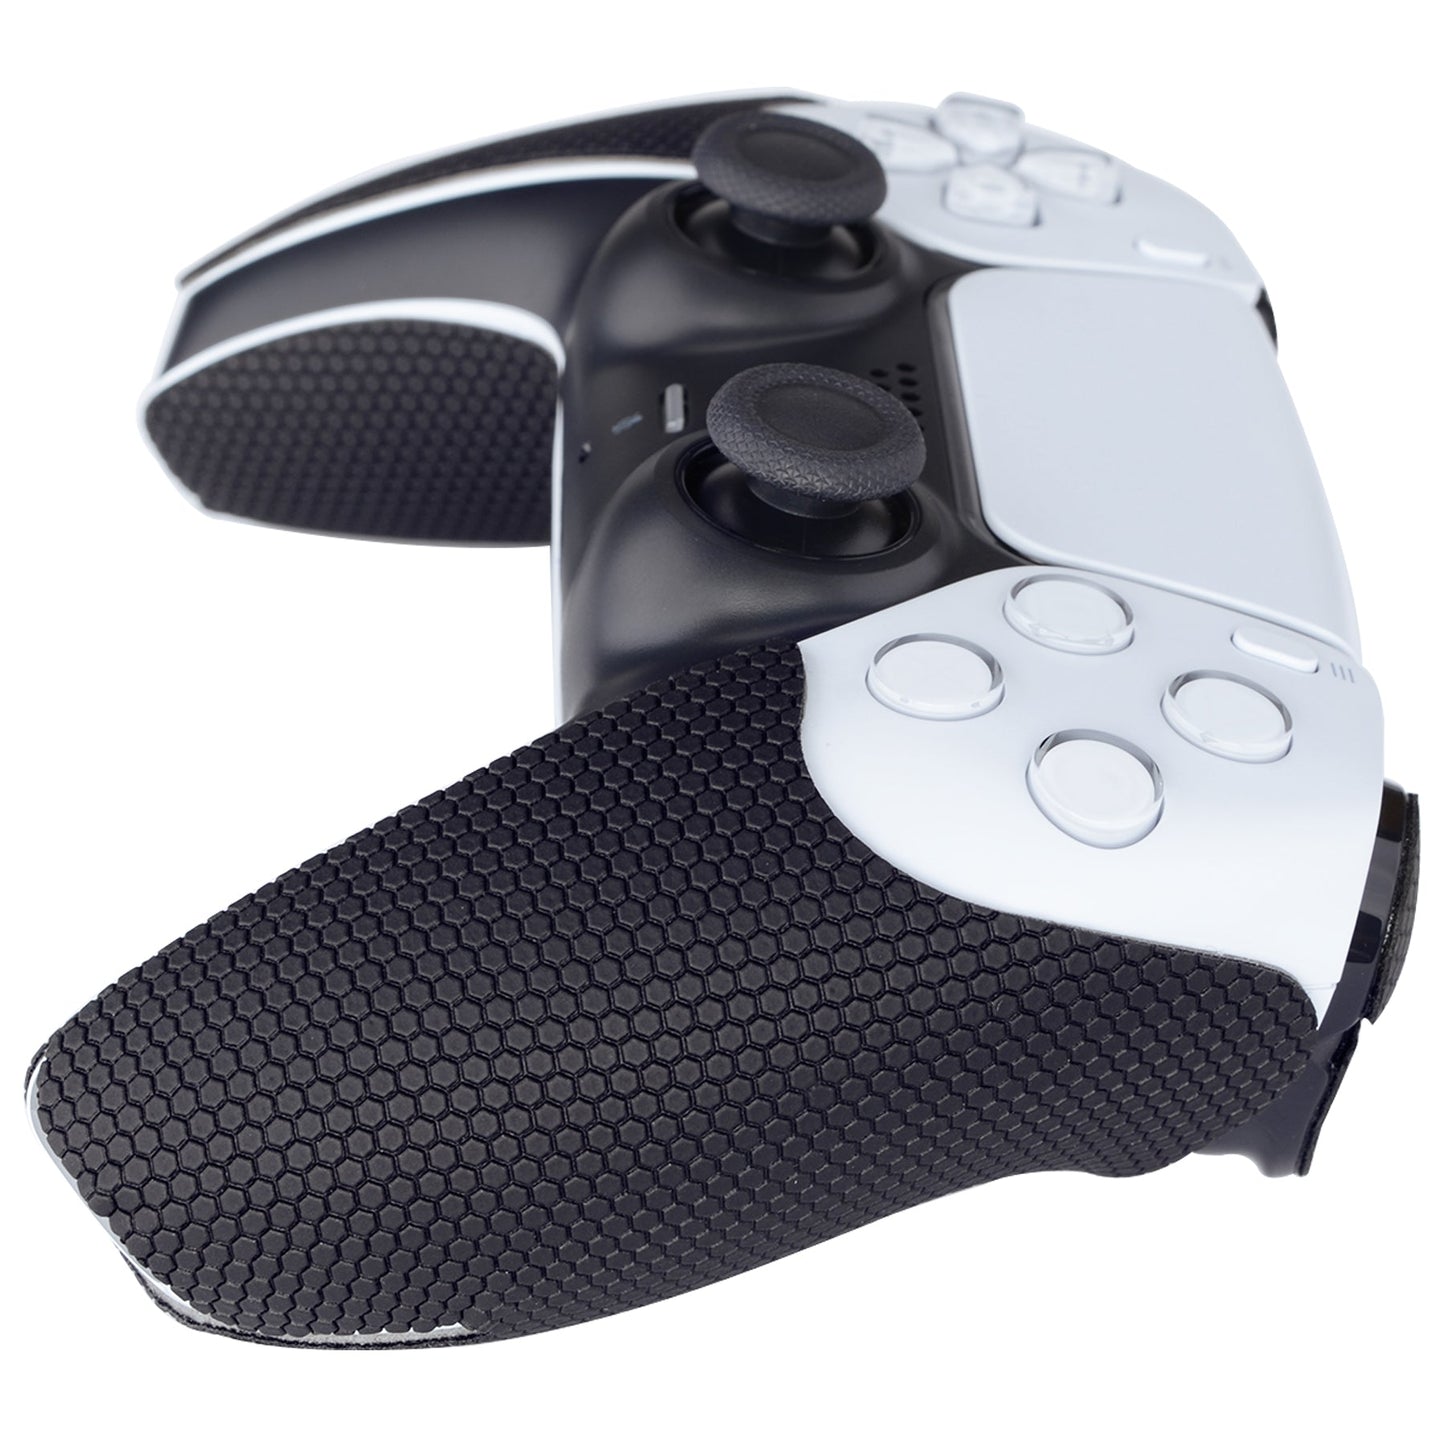 PlayVital Armored Edition Anti-Skid Sweat-Absorbent Controller Grip for PS5, Professional Textured Soft Rubber Pads Handle Grips for PS5 Controller with Shoulder Button Trigger Stickers -  PFPJ049 PlayVital